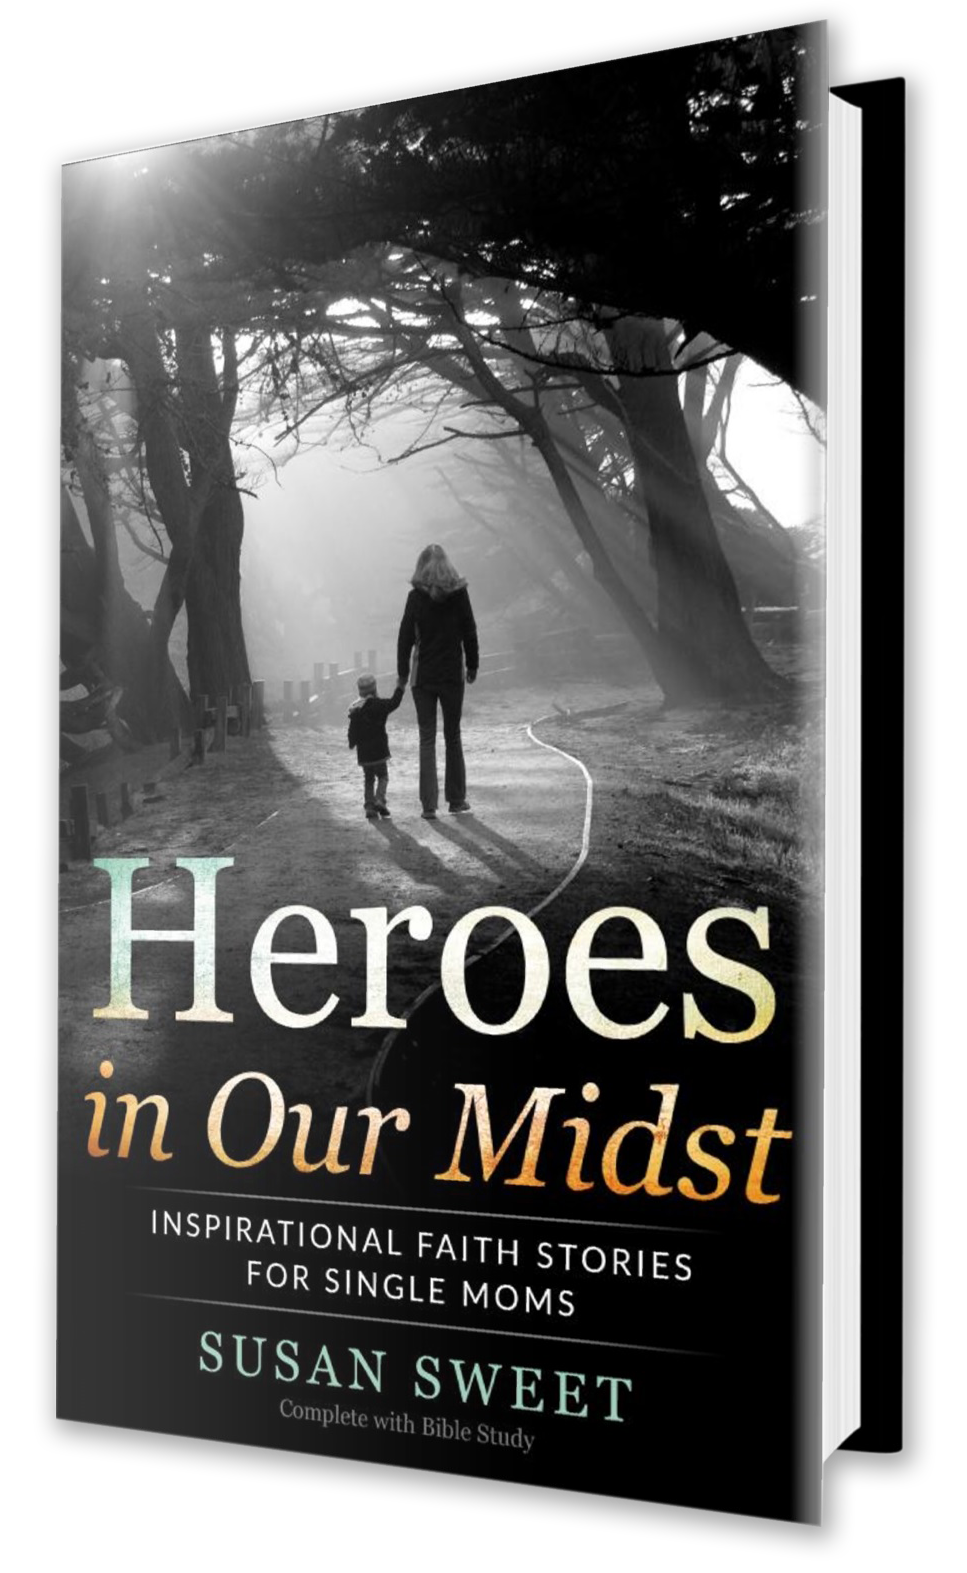 Heroes in Our Midst - Faith edition with Bible Study Guide